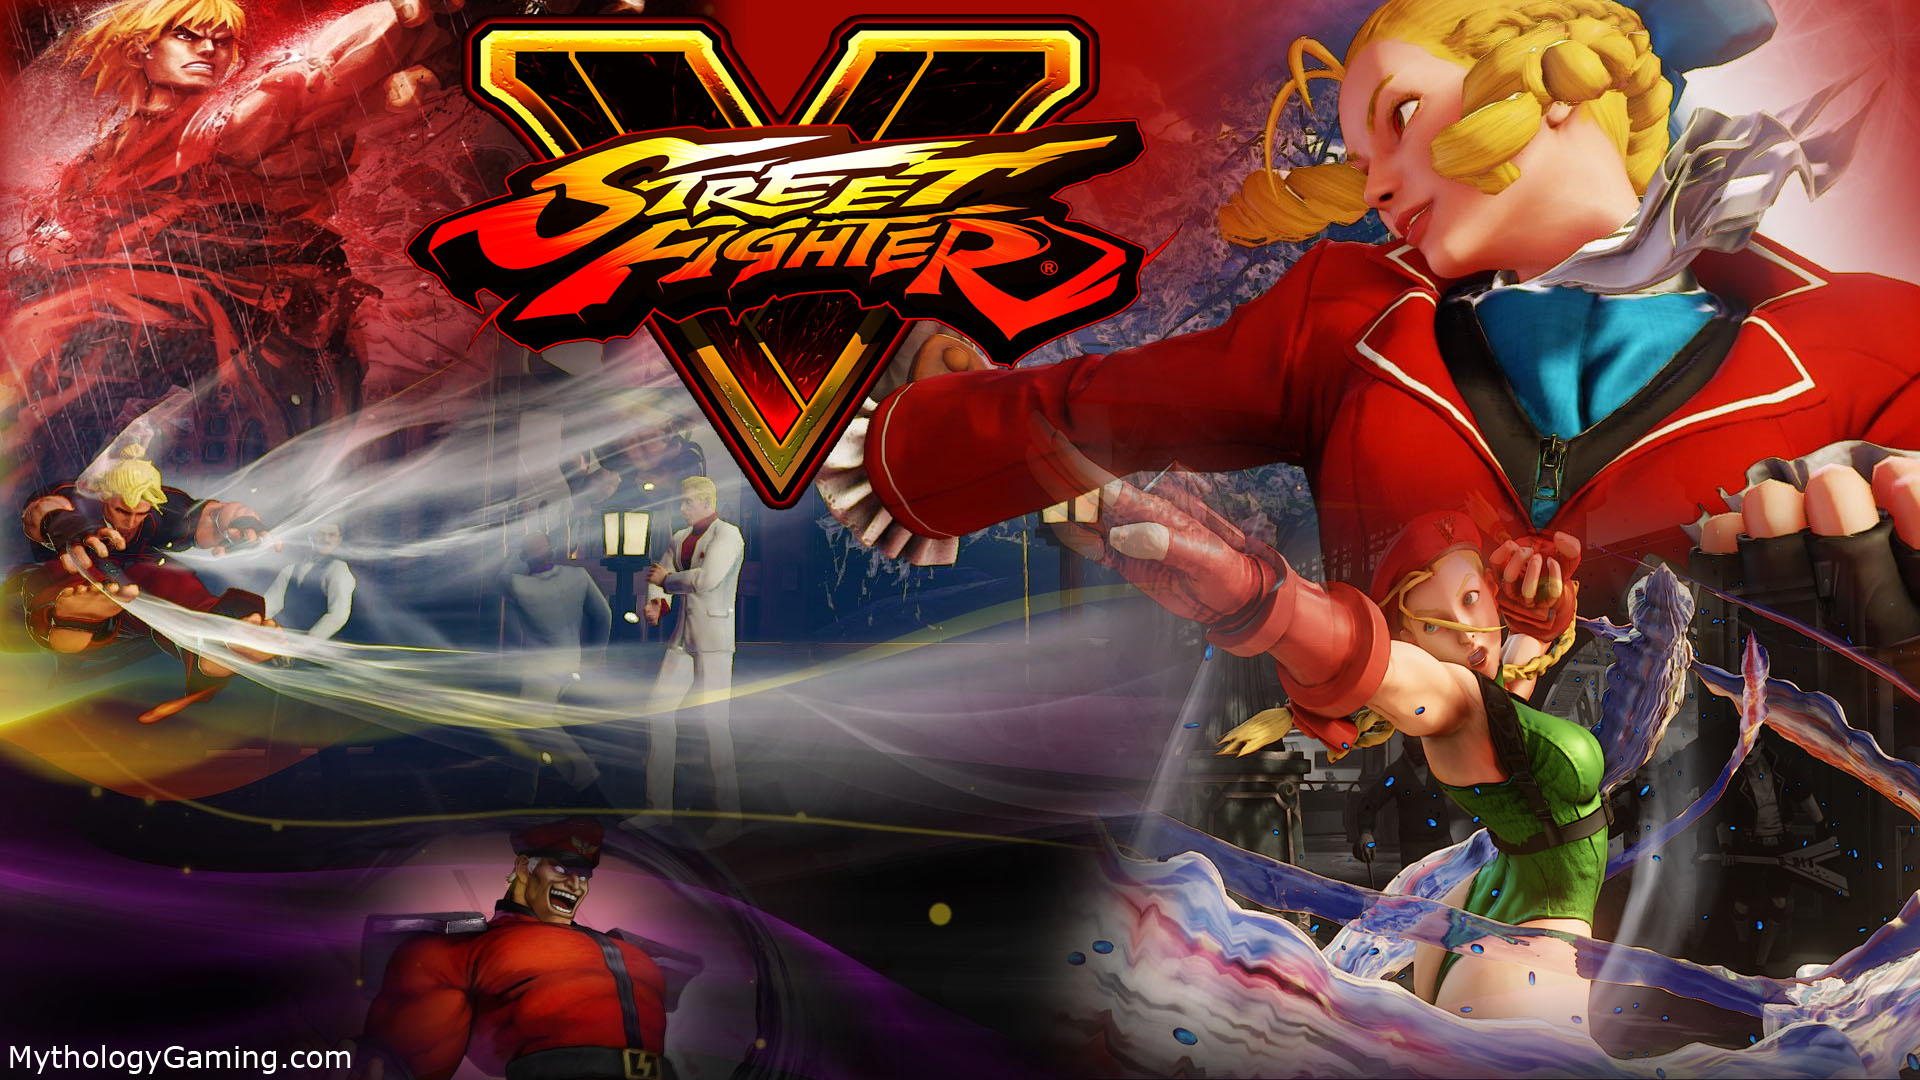 Here Are Some Amazing Street Fighter V Wallpaper For Your Desktop